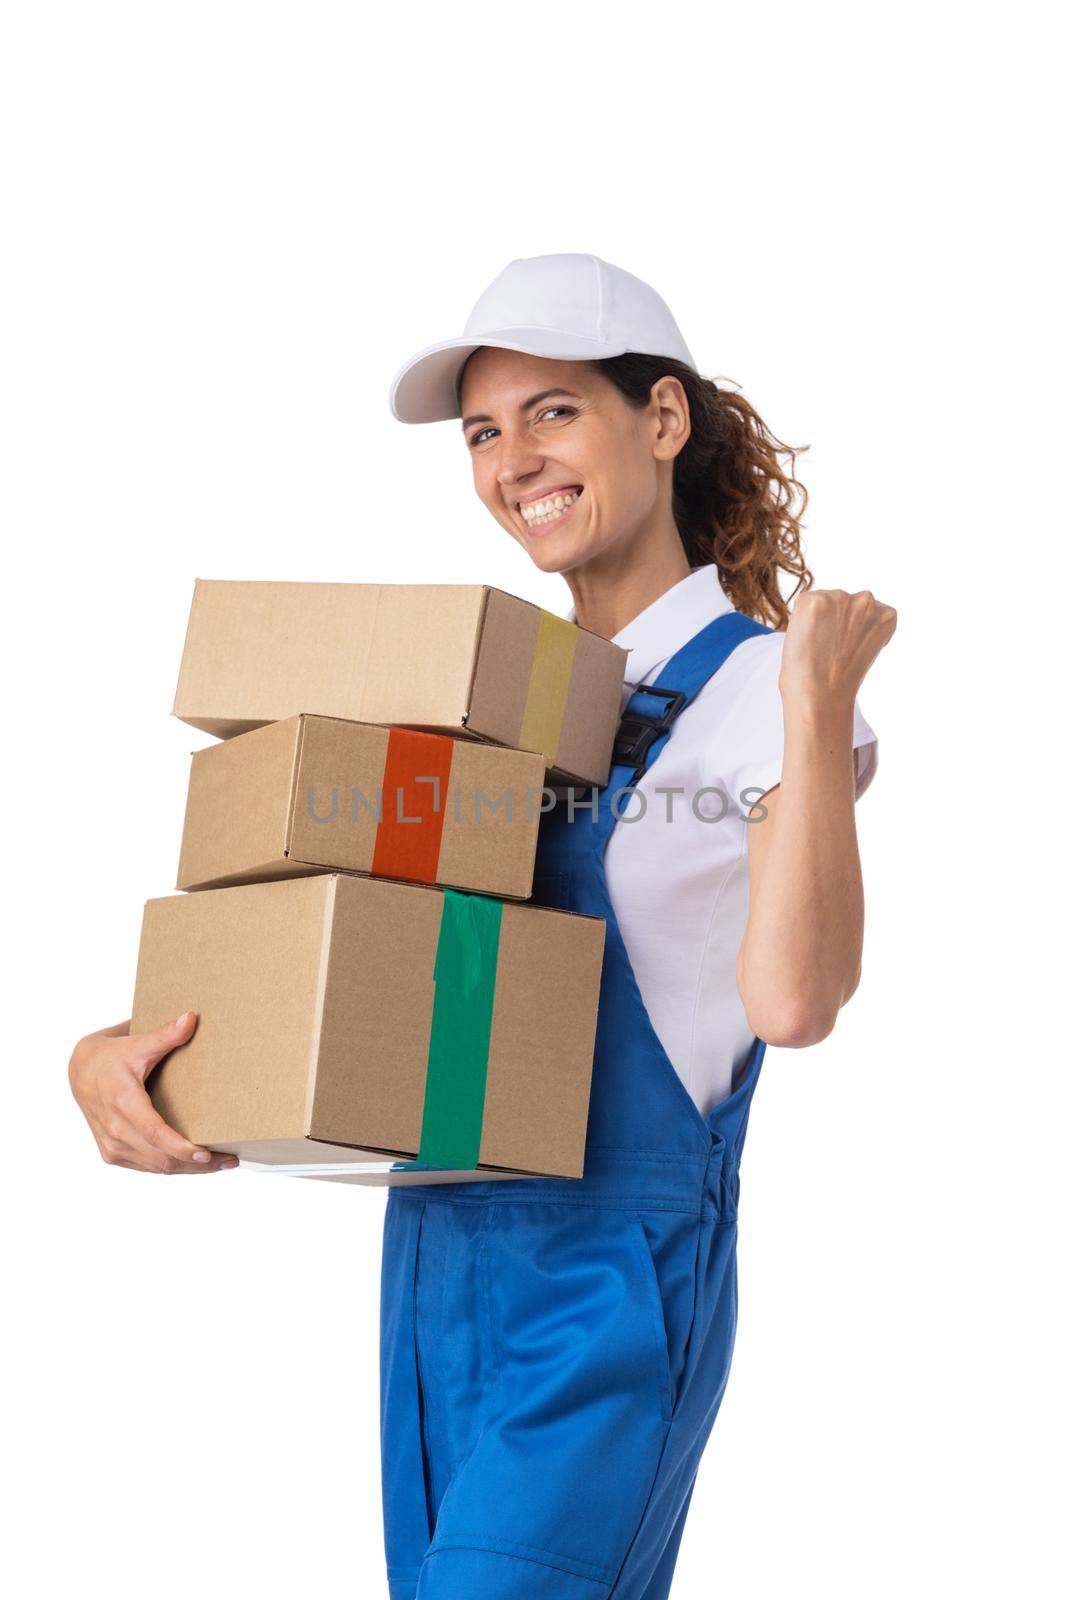 Portrait of delivery woman in white cap, t-shirt giving order boxes isolated on white background. Female courier step, cardboard box. Receiving package.